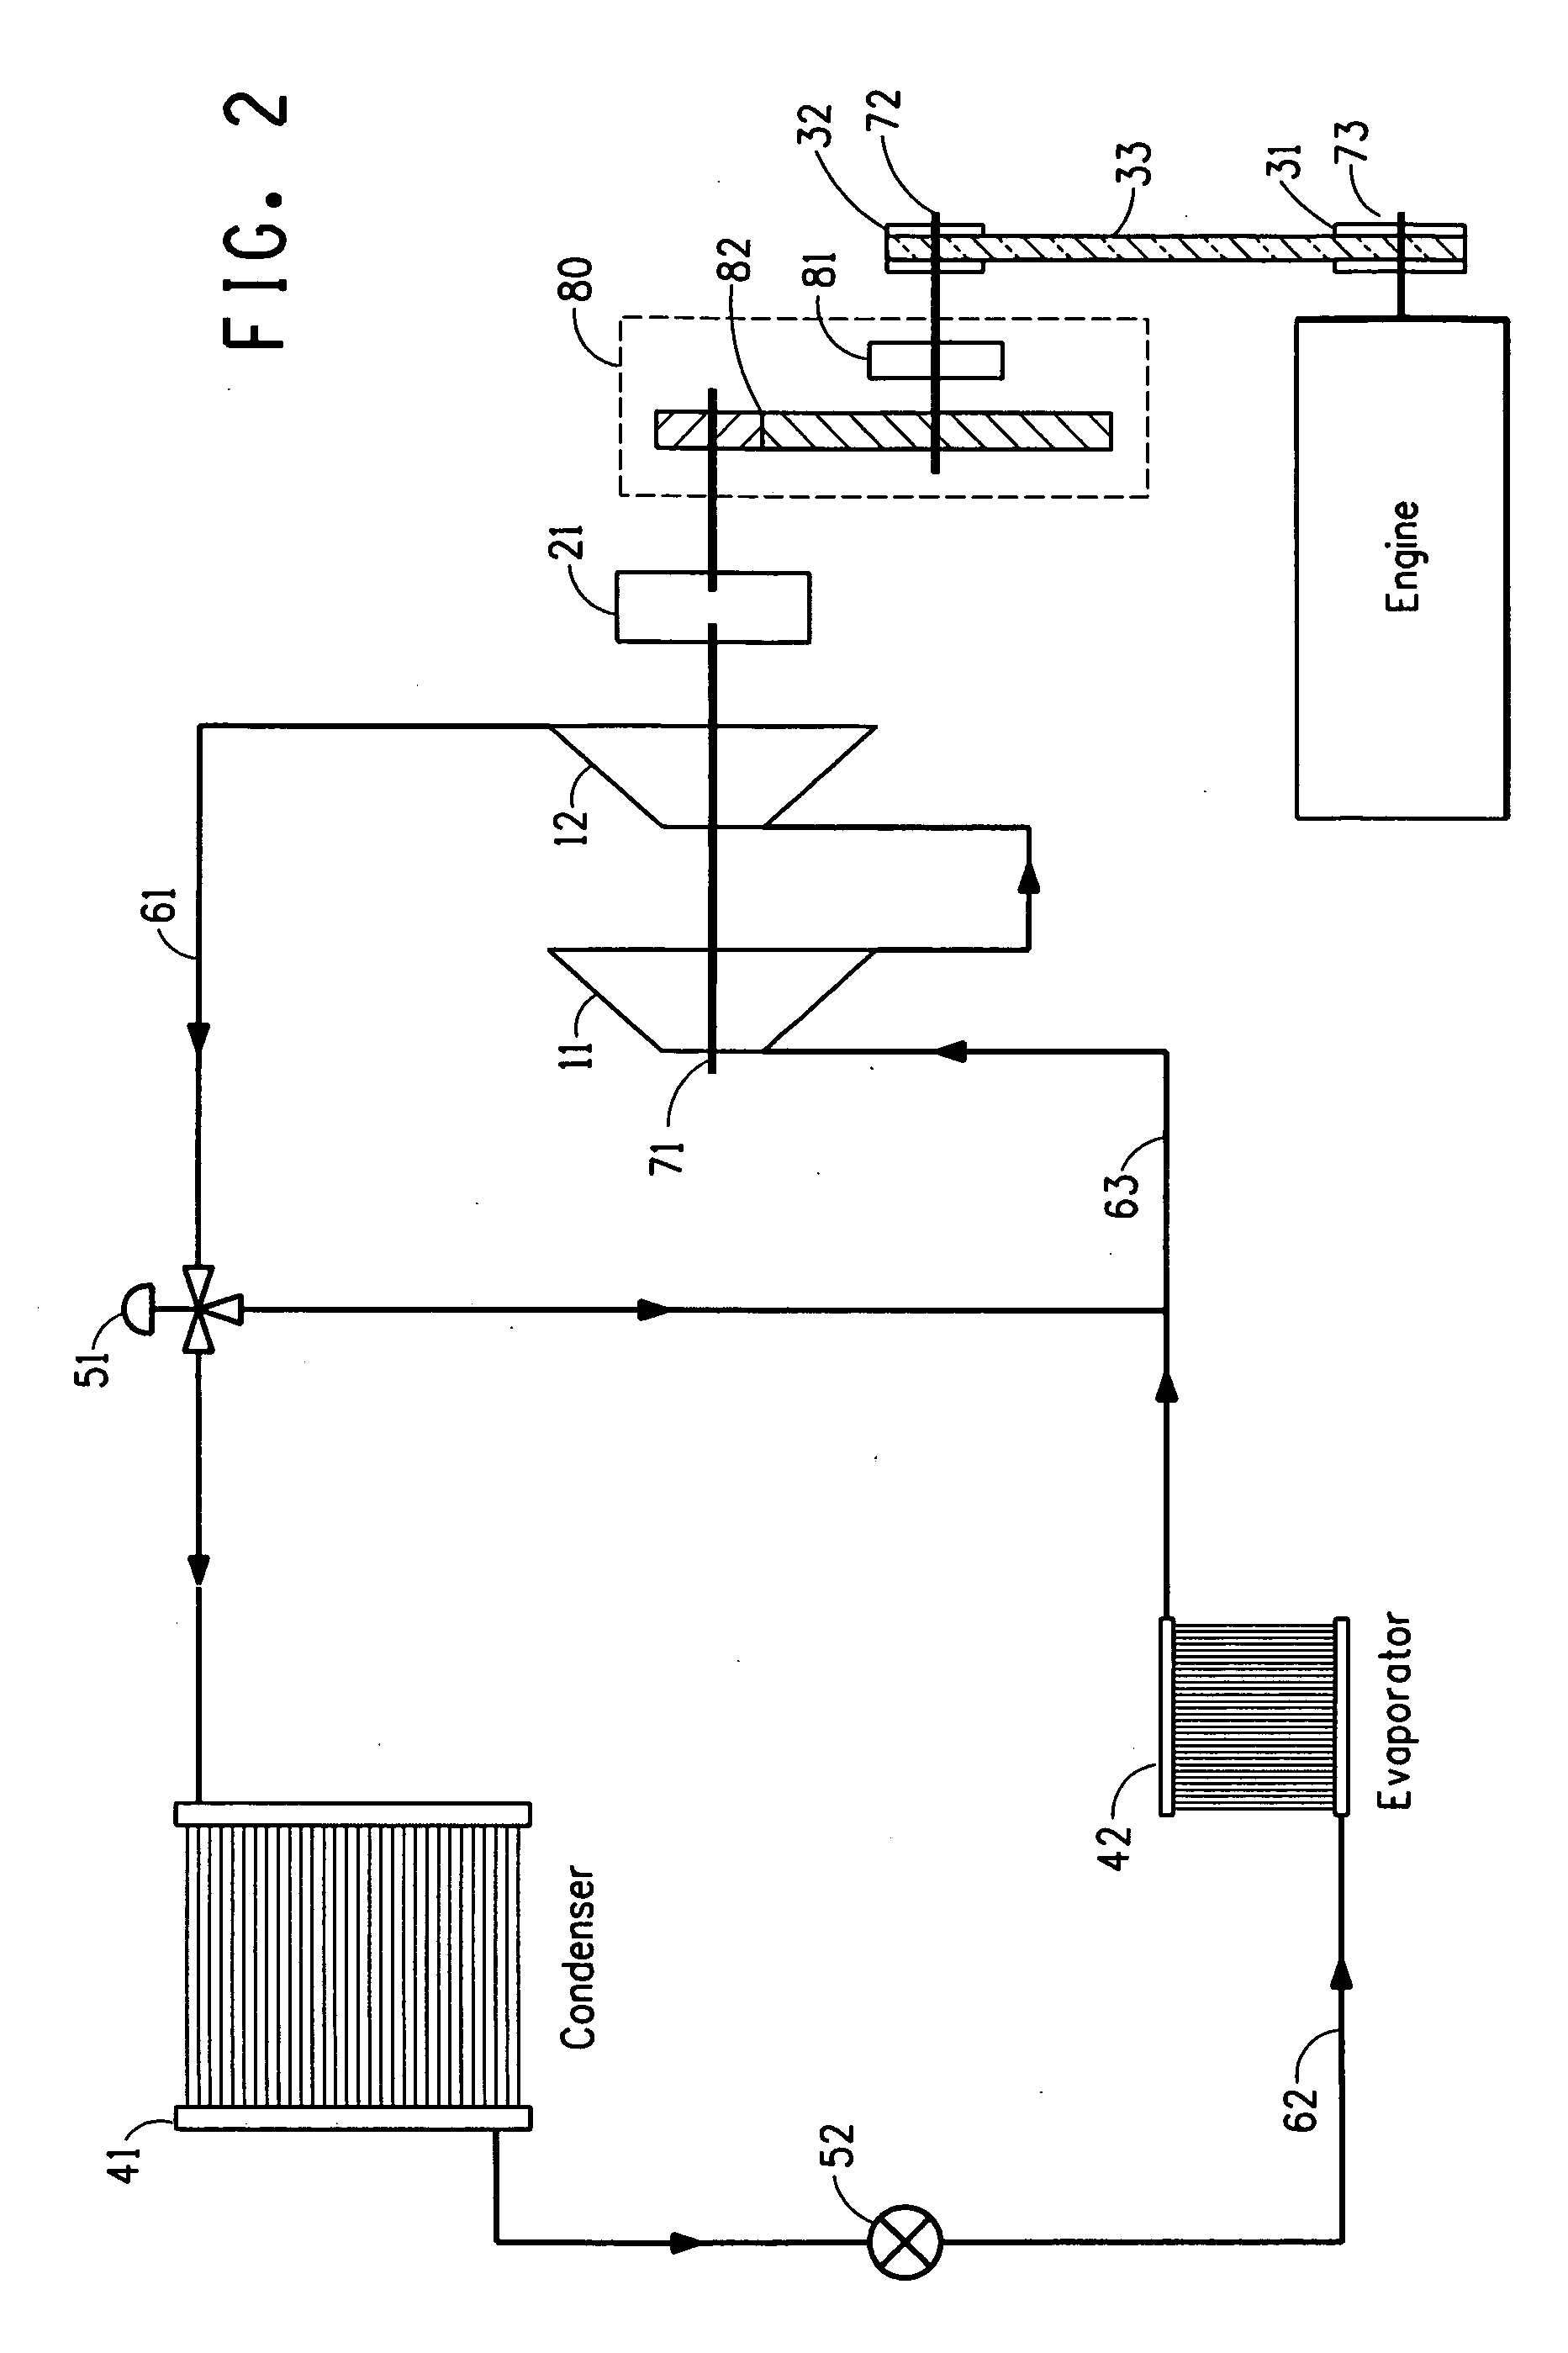 Cooling apparatus powered by a ratioed gear drive assembly